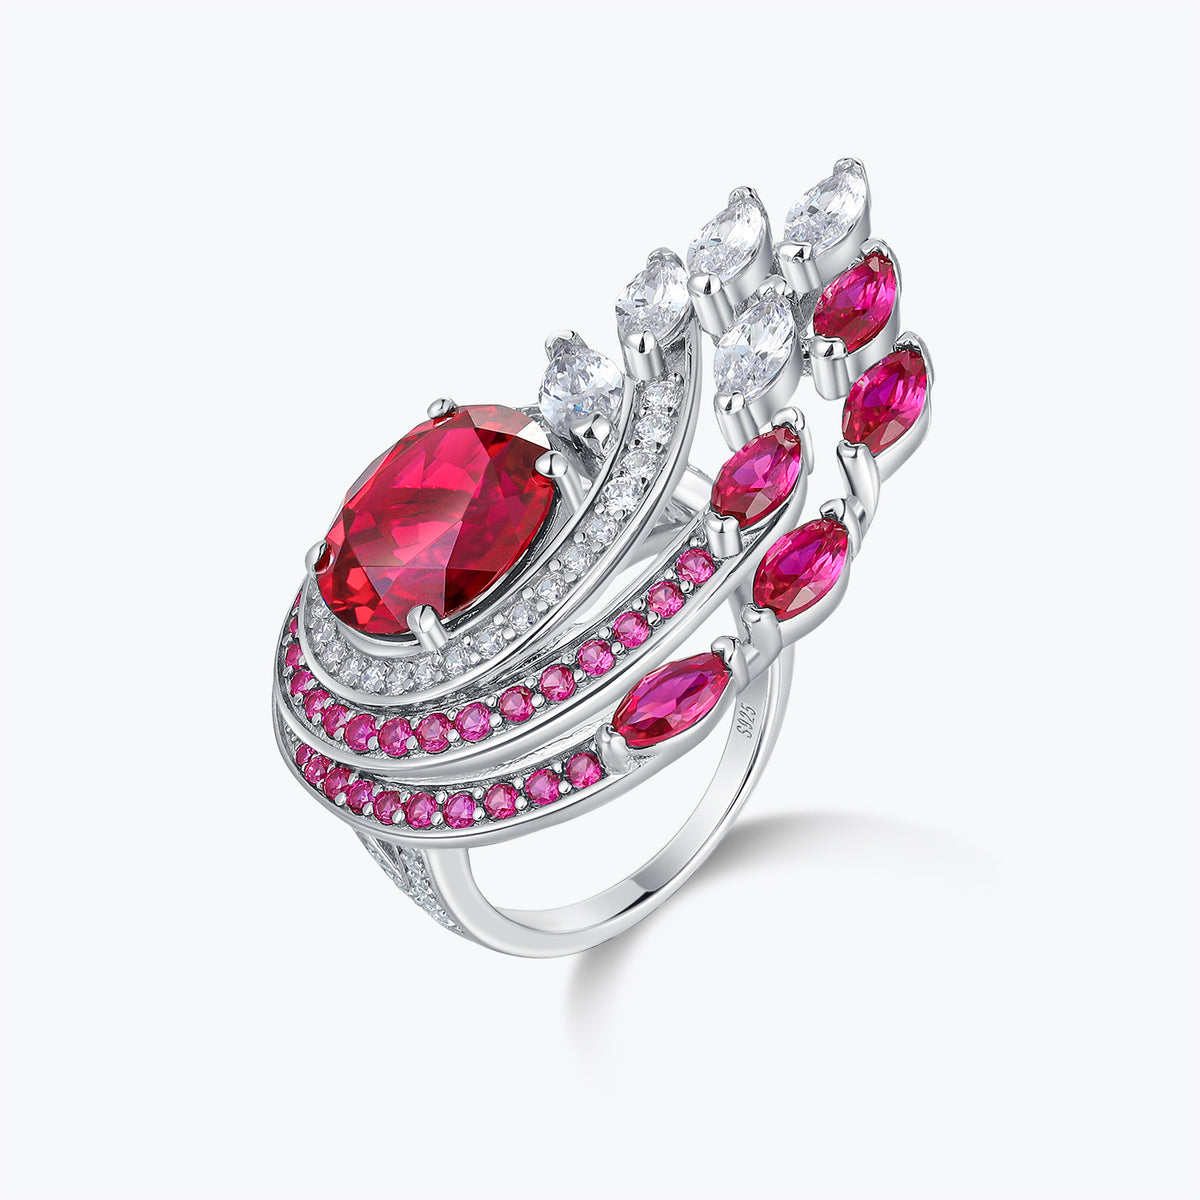 Dissoo® Dazzling Glow Cocktail Ring with 5ct Ruby Red Oval Gemstone